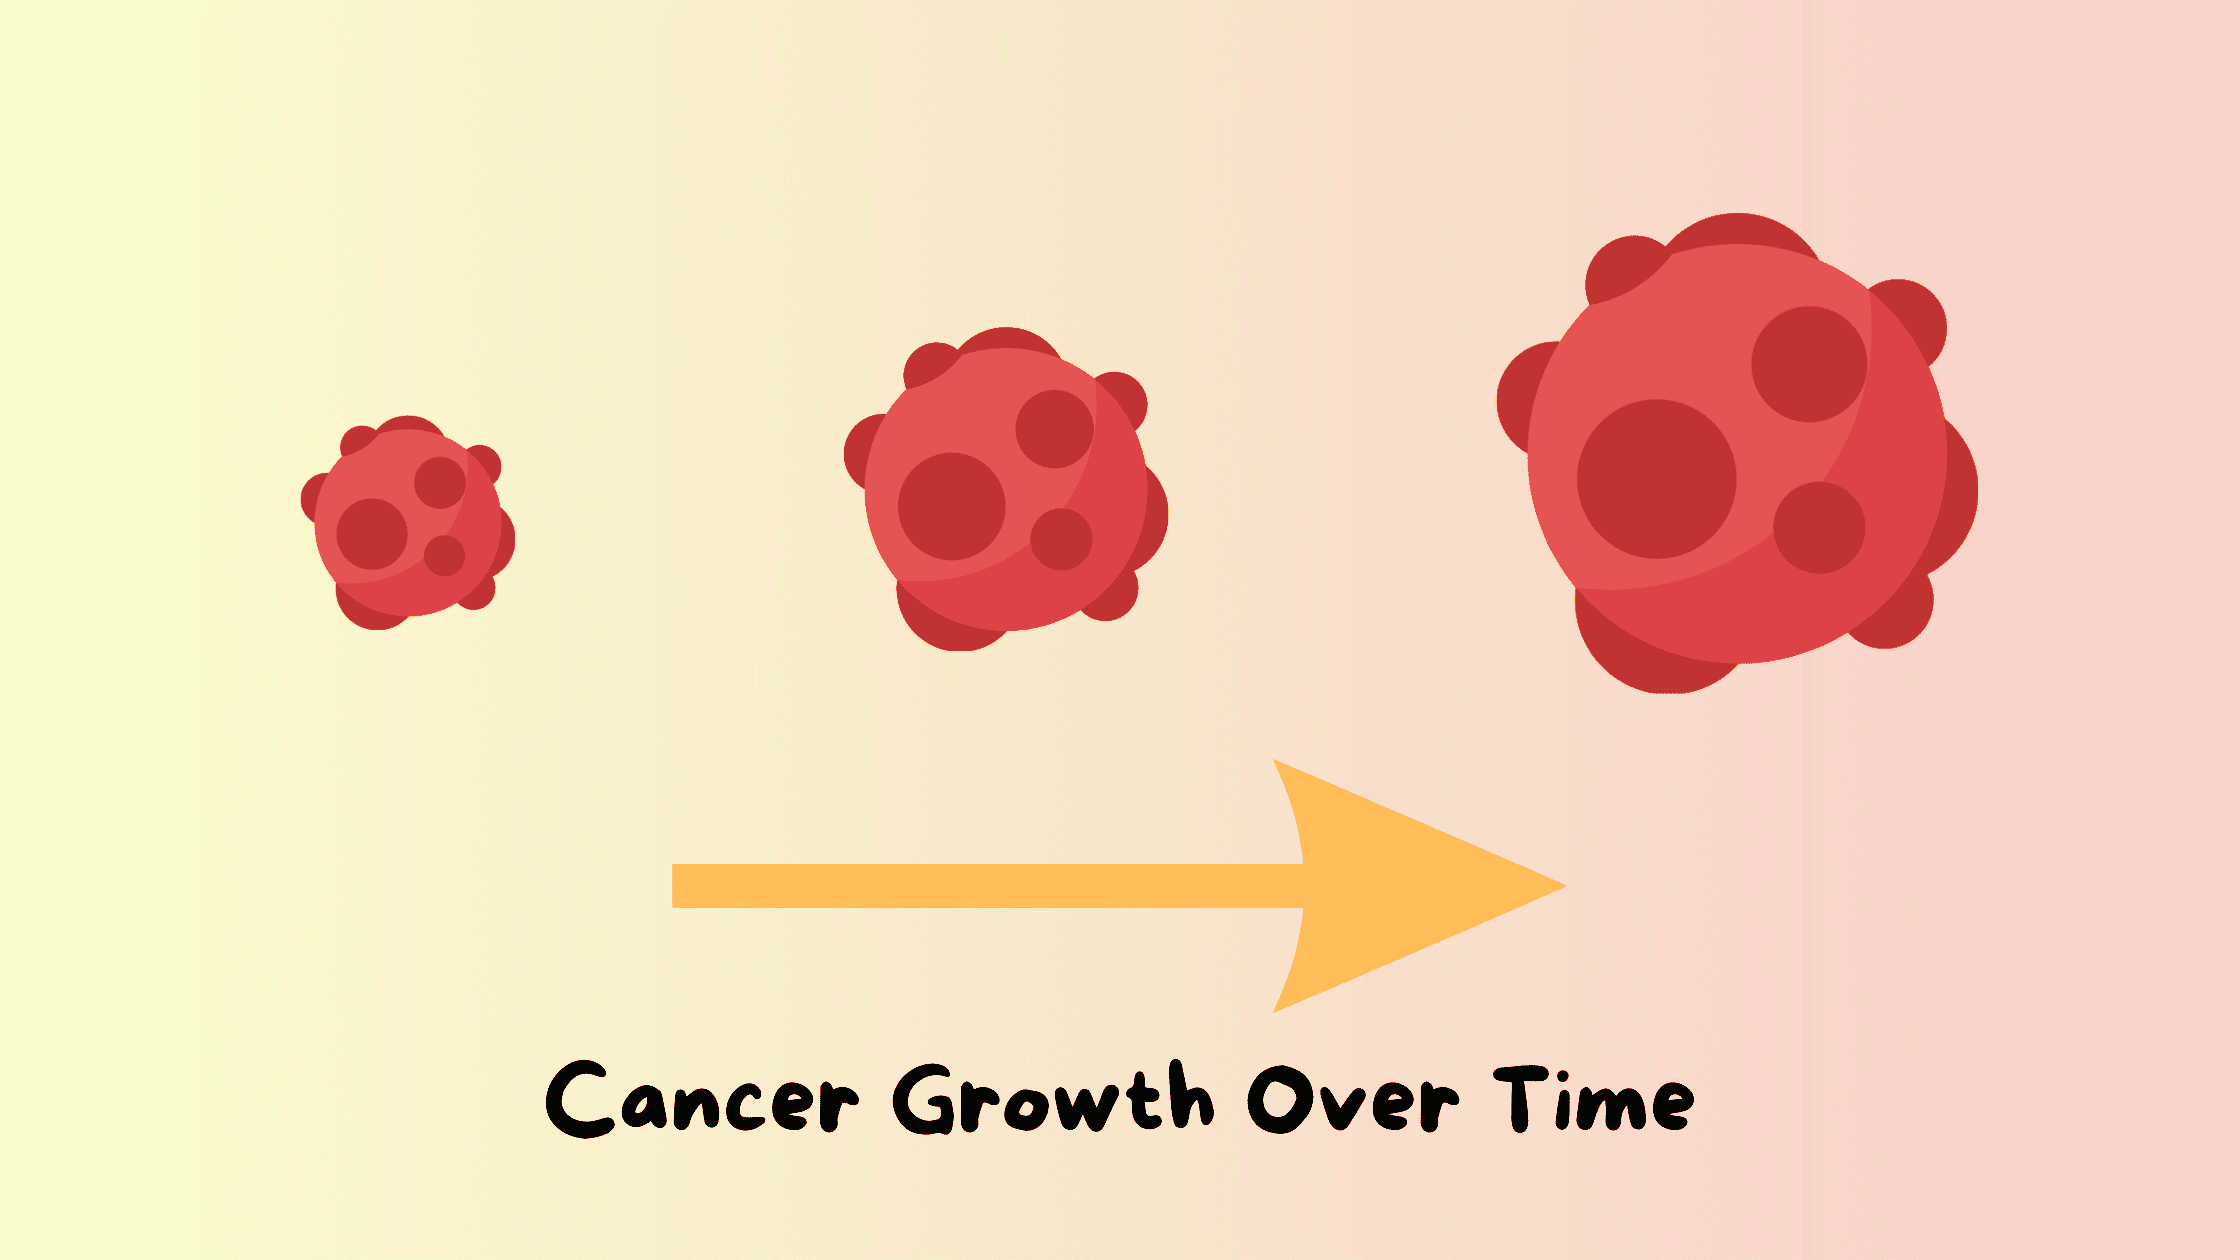 Cancer growth over the years